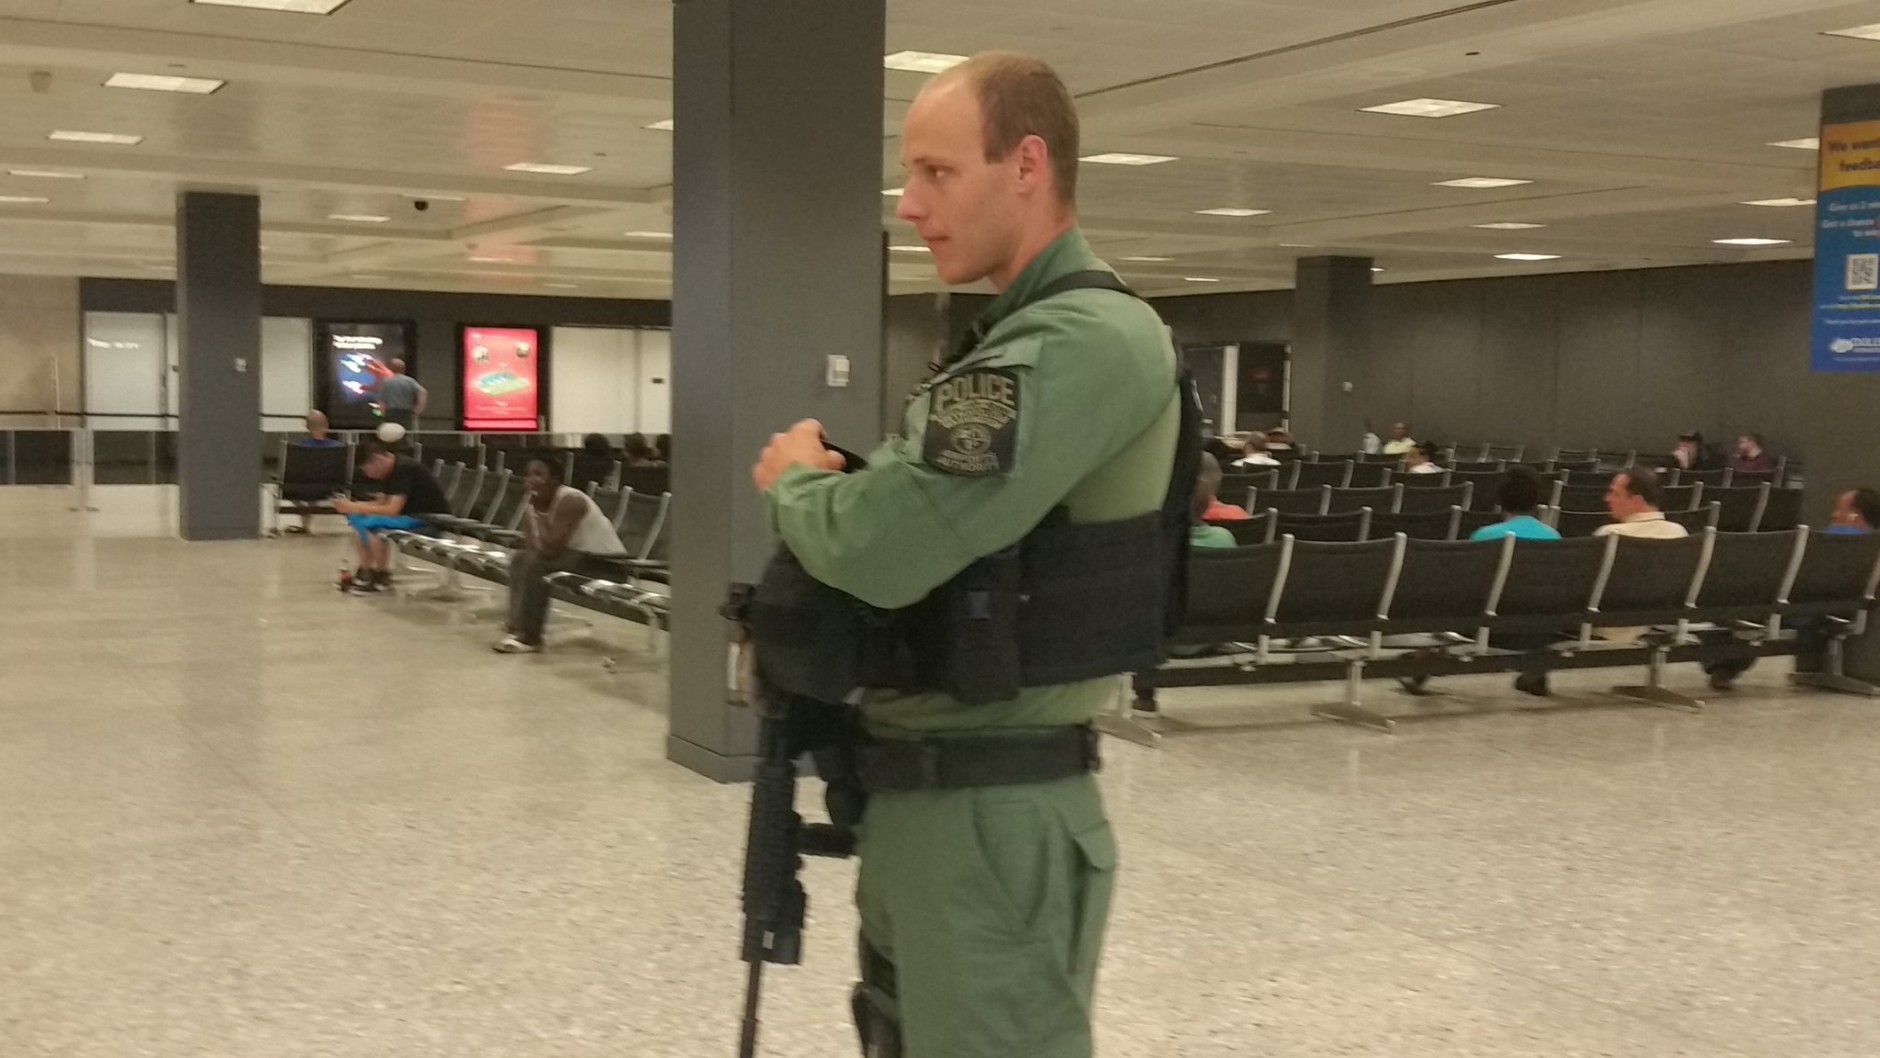 Increased security is seen  at Dulles International Airport on Wednesday, June 29, 2016, a day after terror attacks killed dozens at the airport in Istanbul. (WTOP/Kathy Stewart)